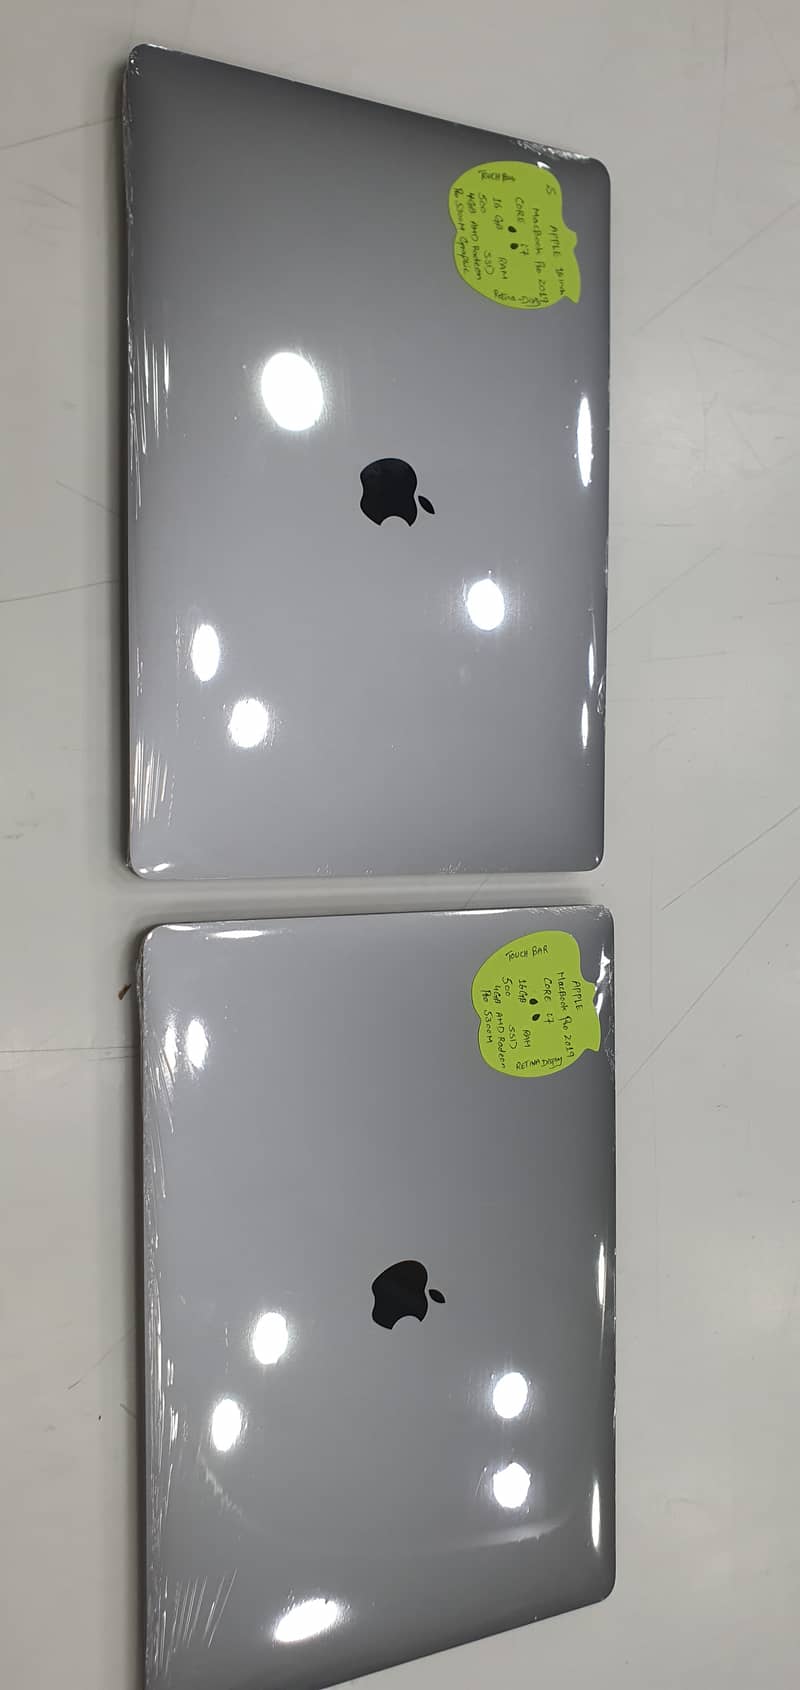 Apple Macbook Pro 2019 16'inches with Retina Display Touchbar for sale 13